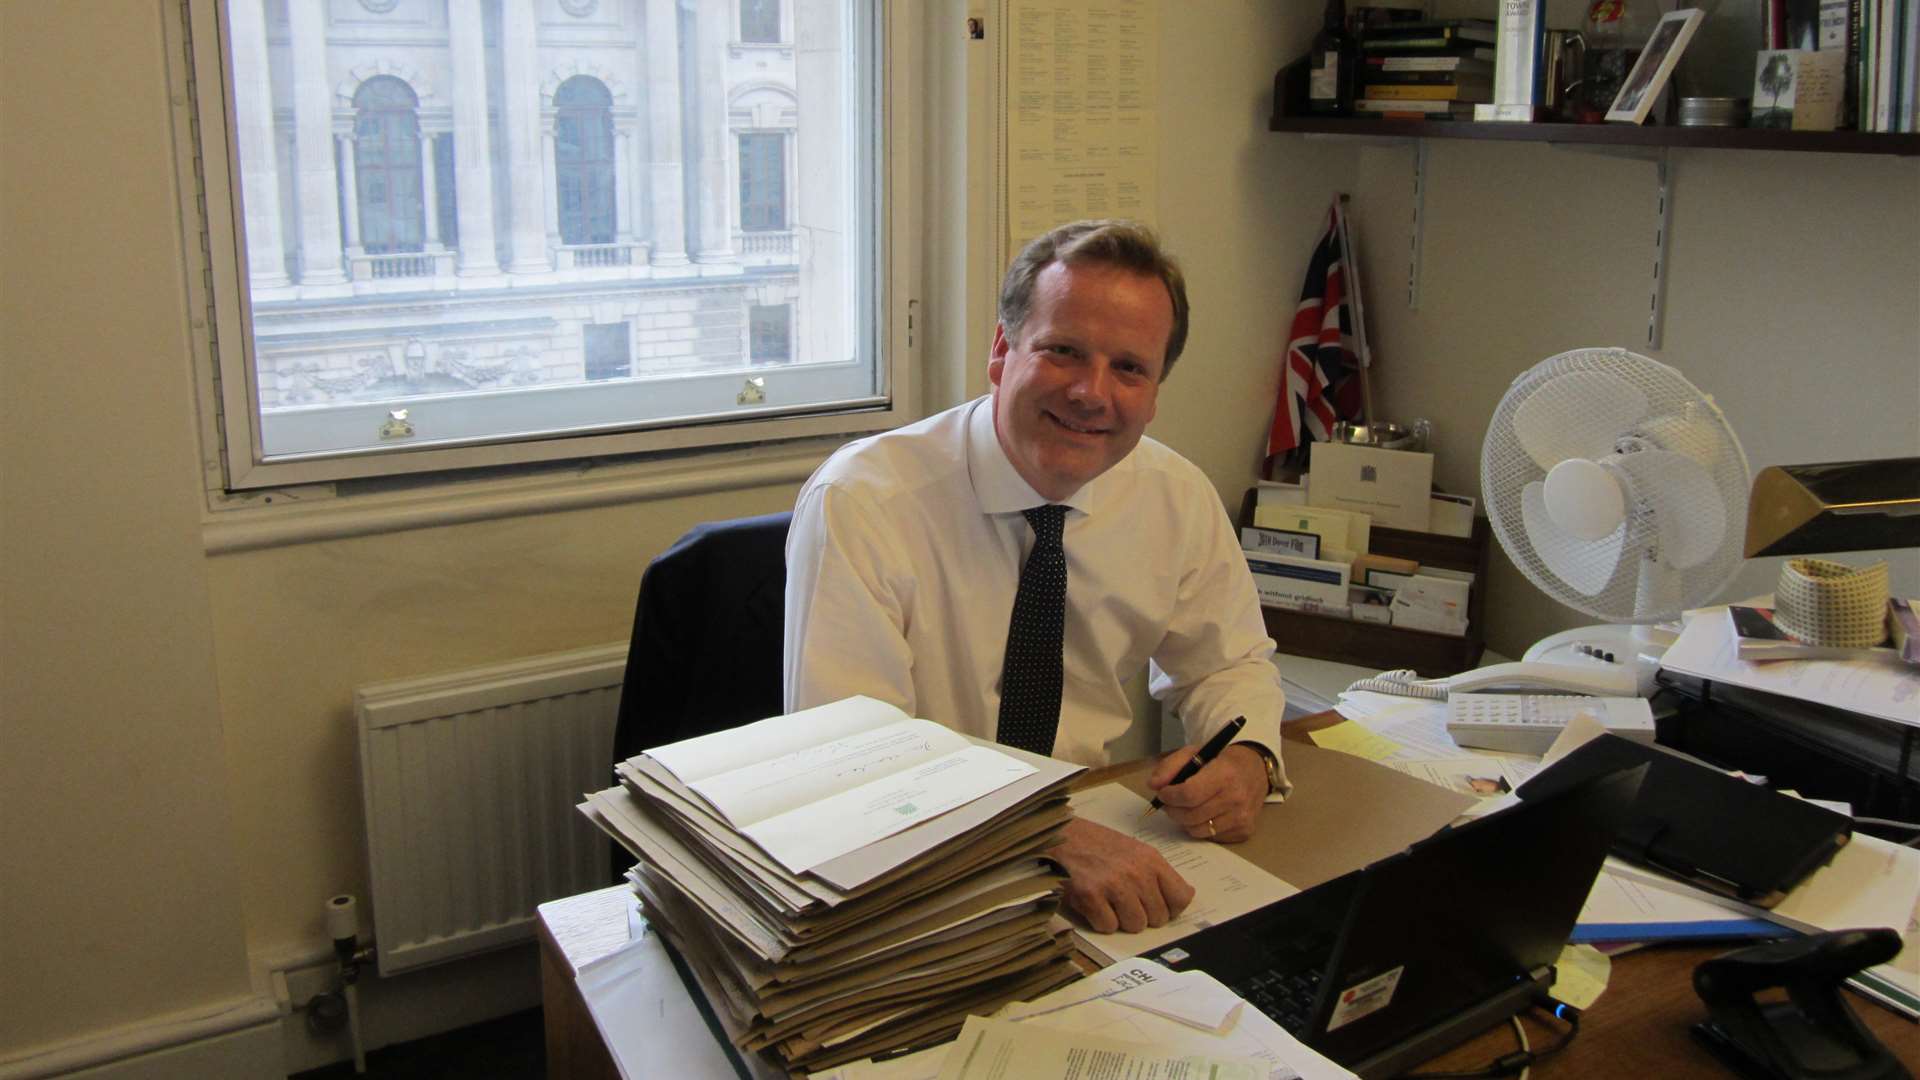 Dover and Deal MP Charlie Elphicke denies any wrongdoing